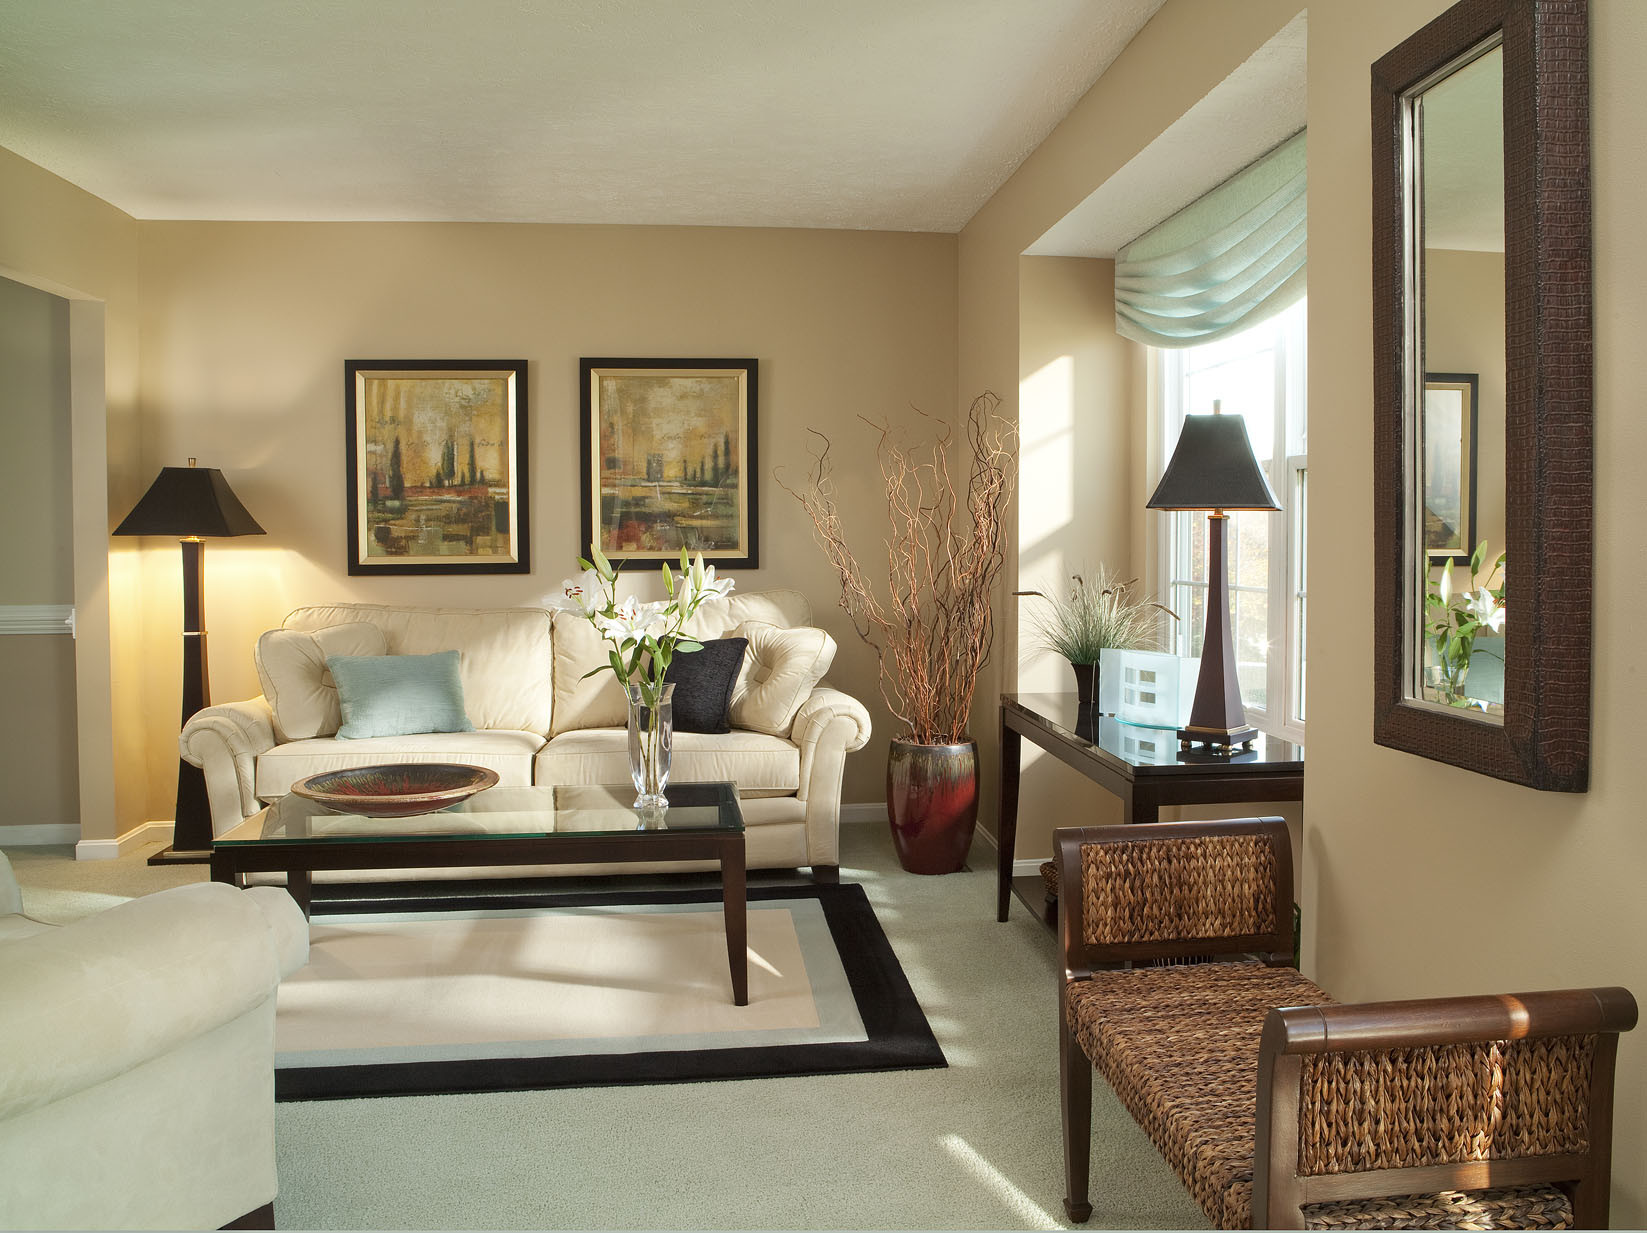 Living Room Decorating Styles
 What’s your design style Is it Transitional